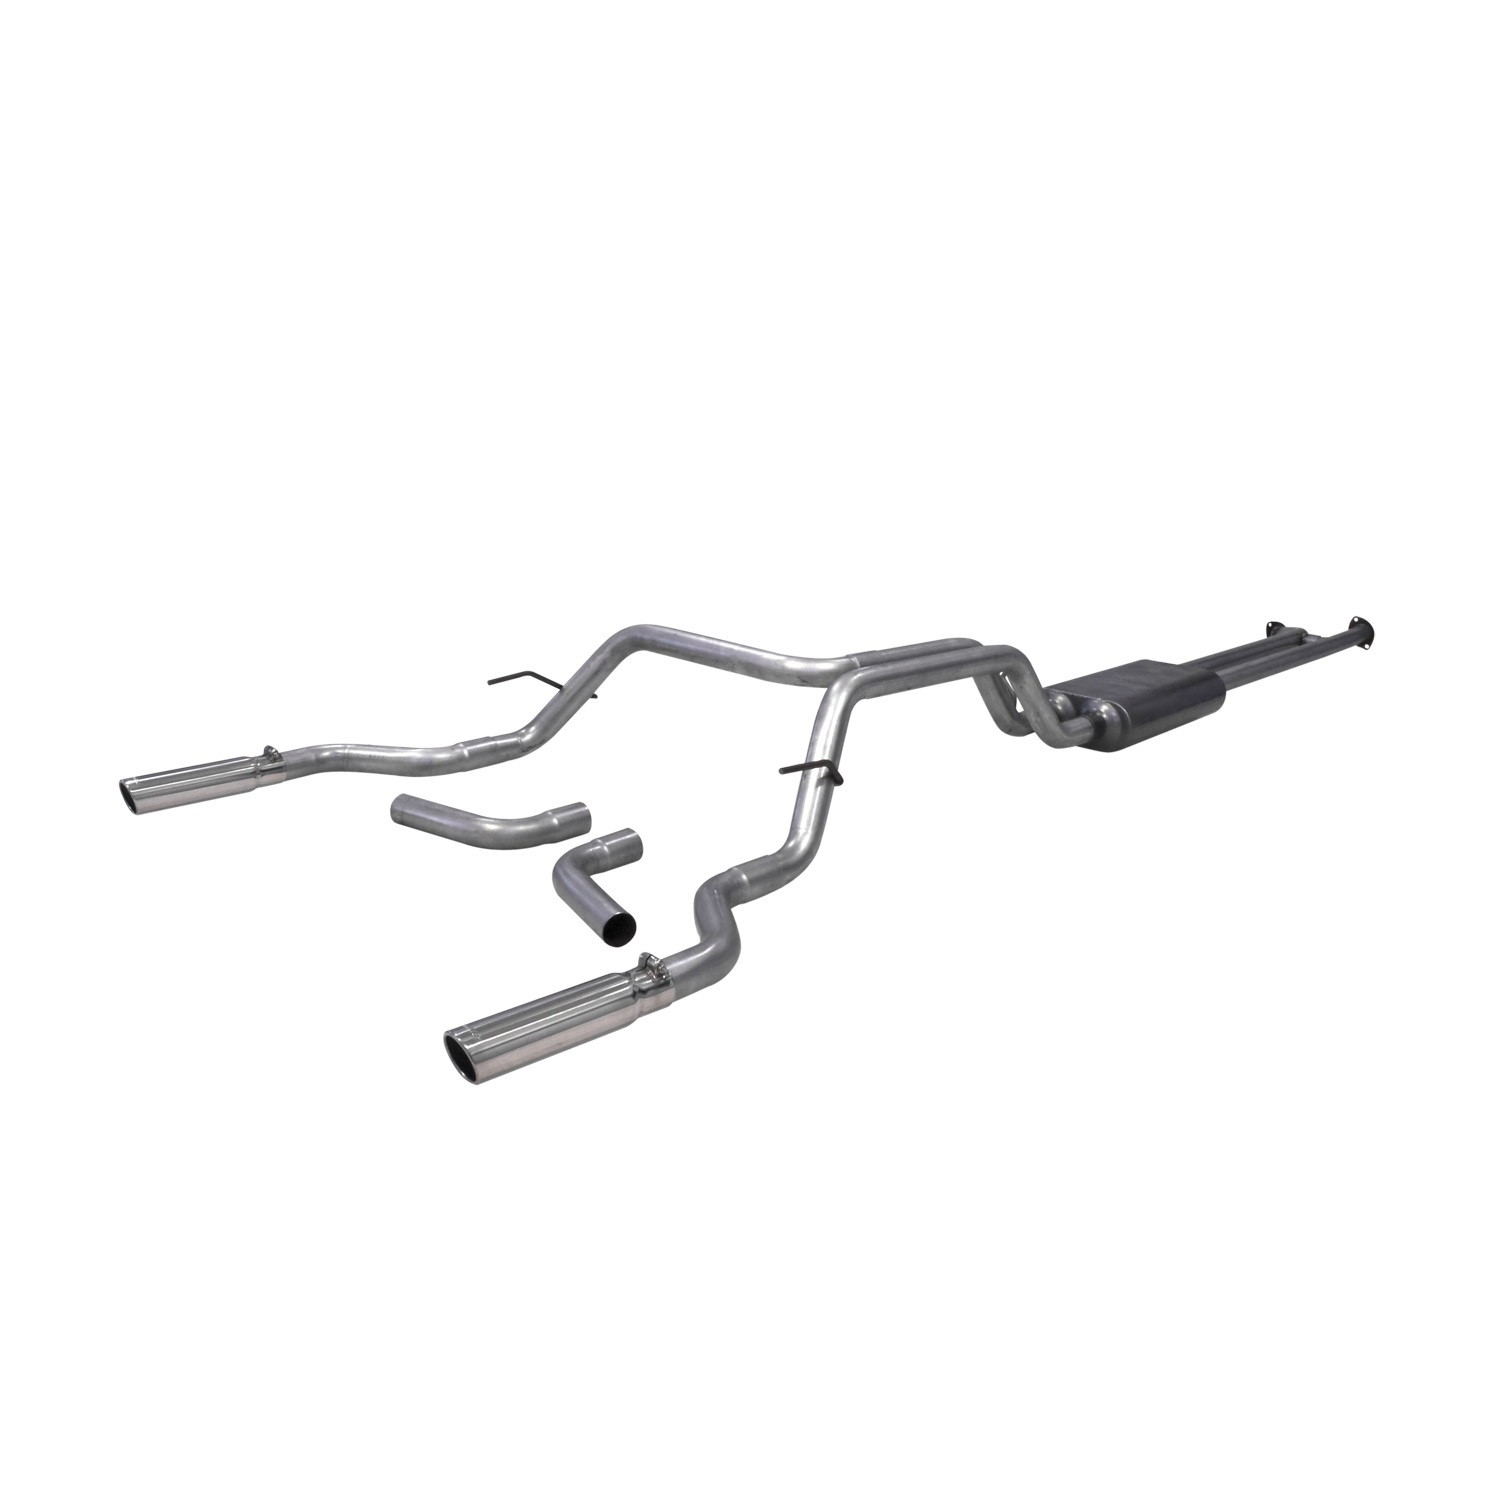 Flowmaster Flowmaster 817650 American Thunder Cat Back Exhaust System Fits 07-09 Tundra